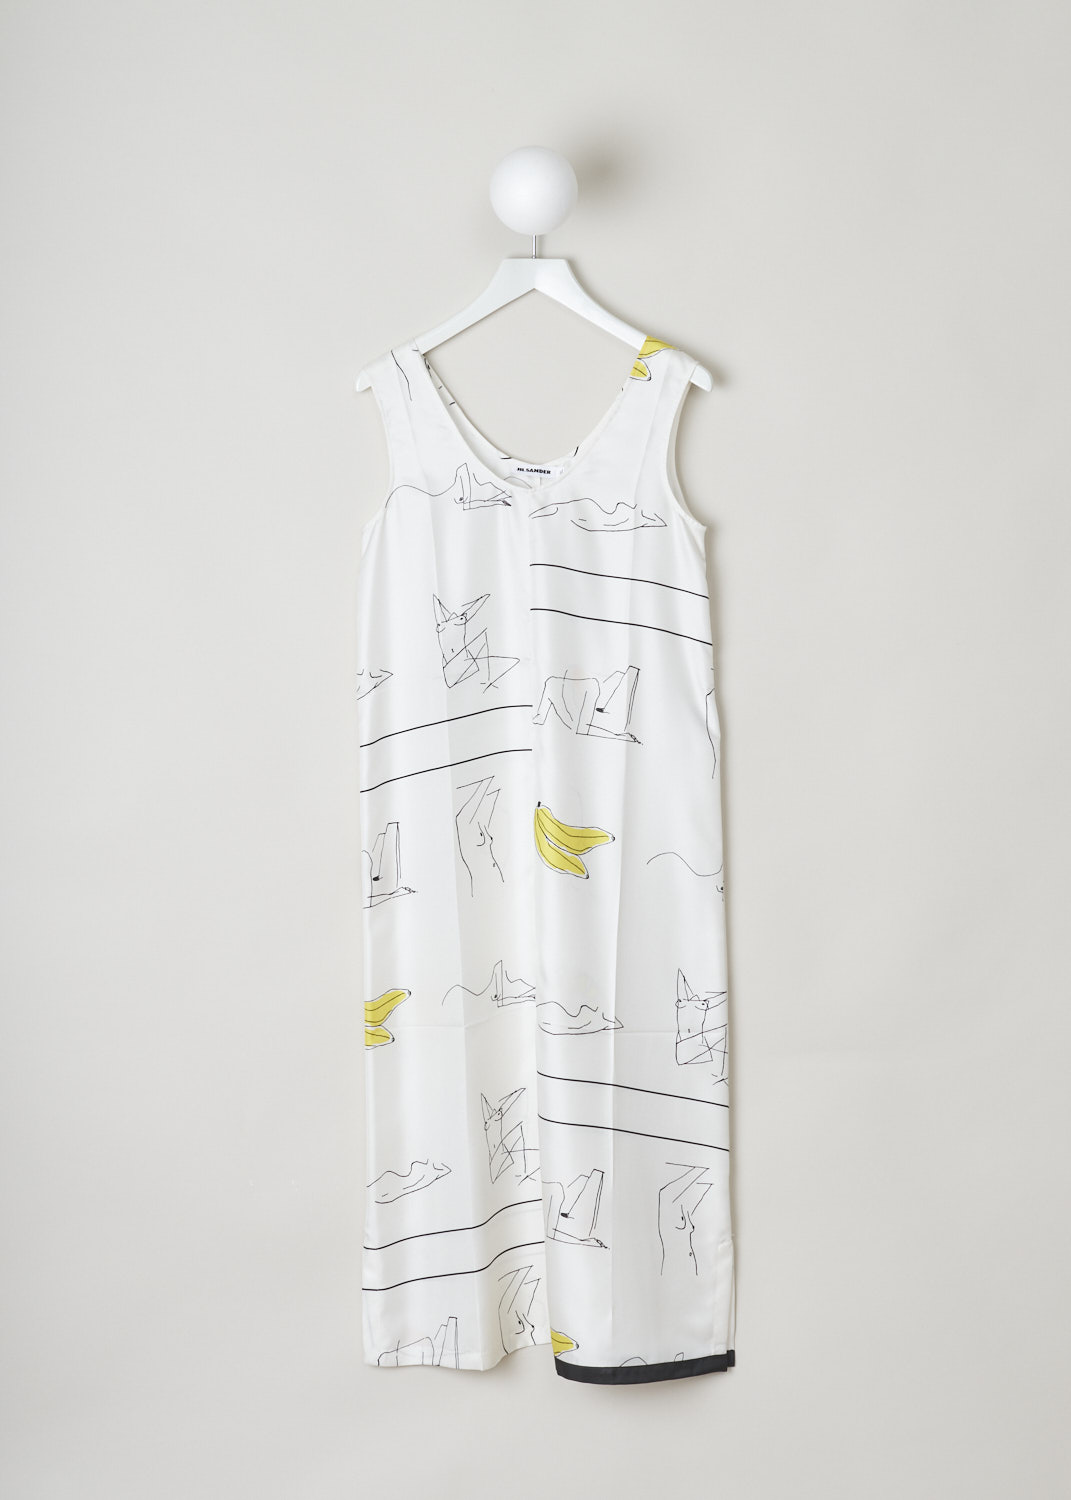 Jill Sander, Off-white maxi shift dress, JSW0508956_W0281266B_127, white, front, Off-white dress featuring a maxi length and comes decorated with multiple abstract drawings. Designed with a round neckline and no sleeves. Small splits can be found on the side seam, and strip of black fabric trims the hem. 